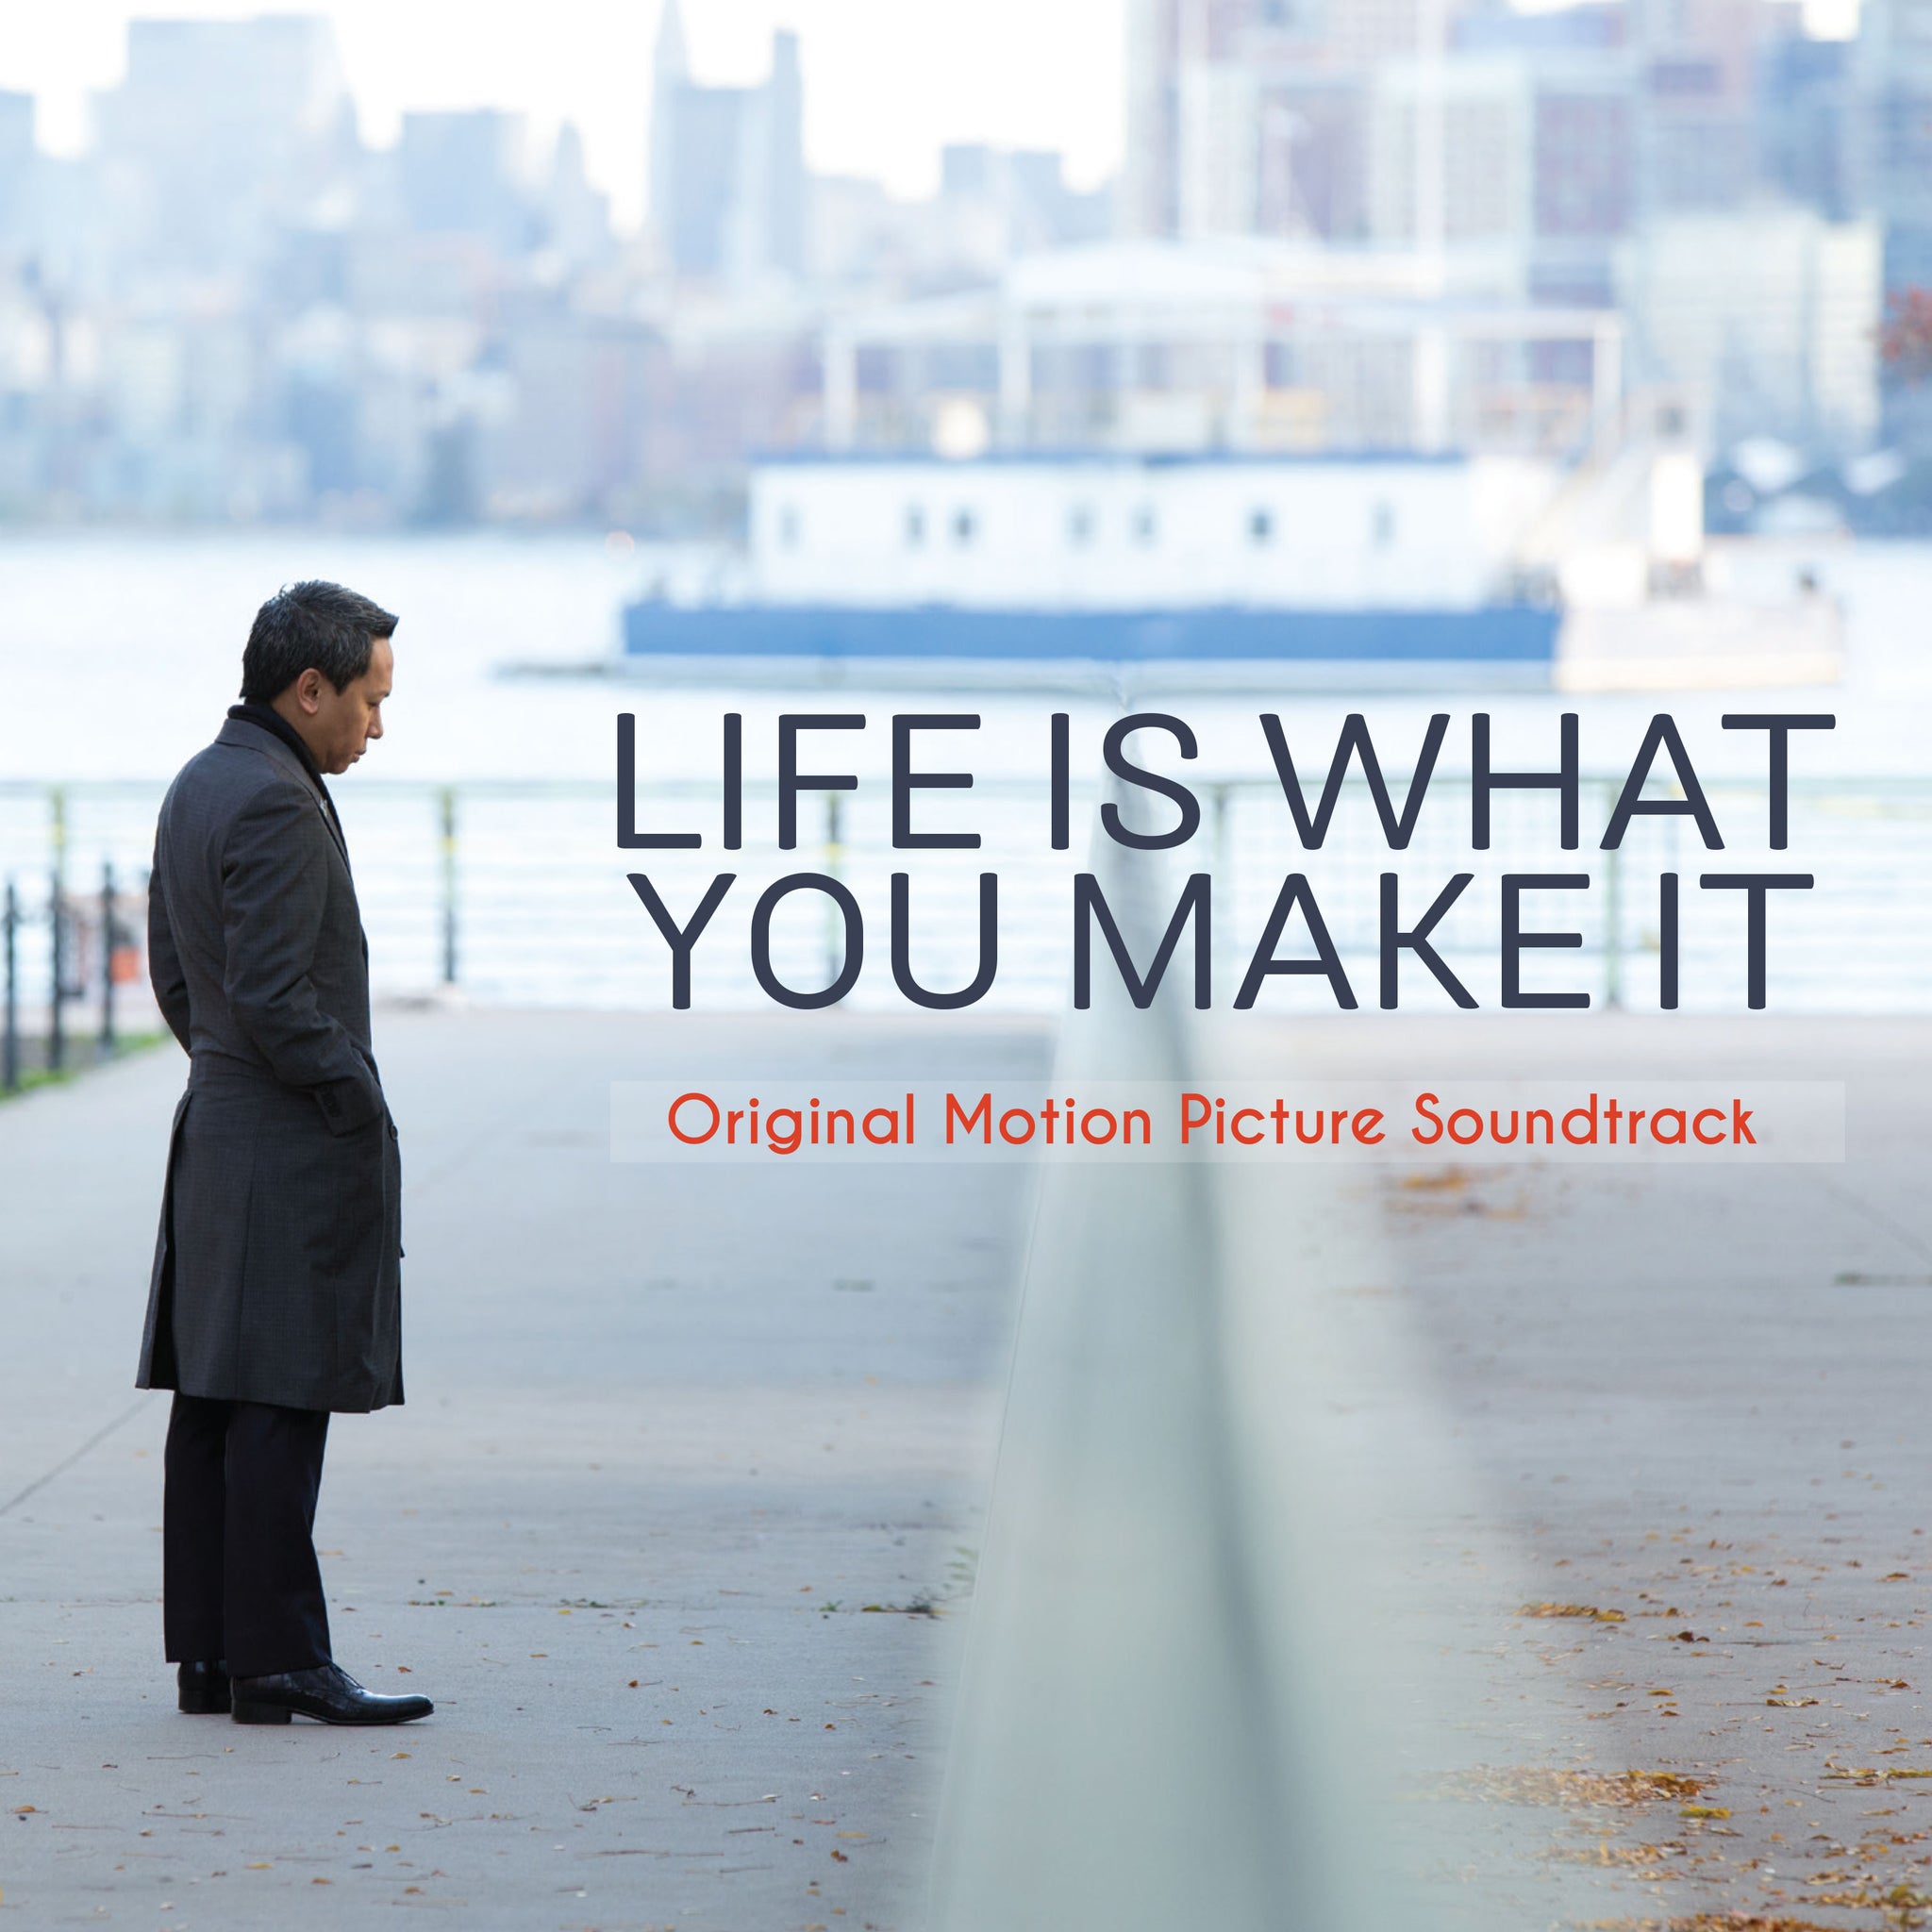 Life Is What You Make It (Original Motion Picture Soundtrack) [CD]